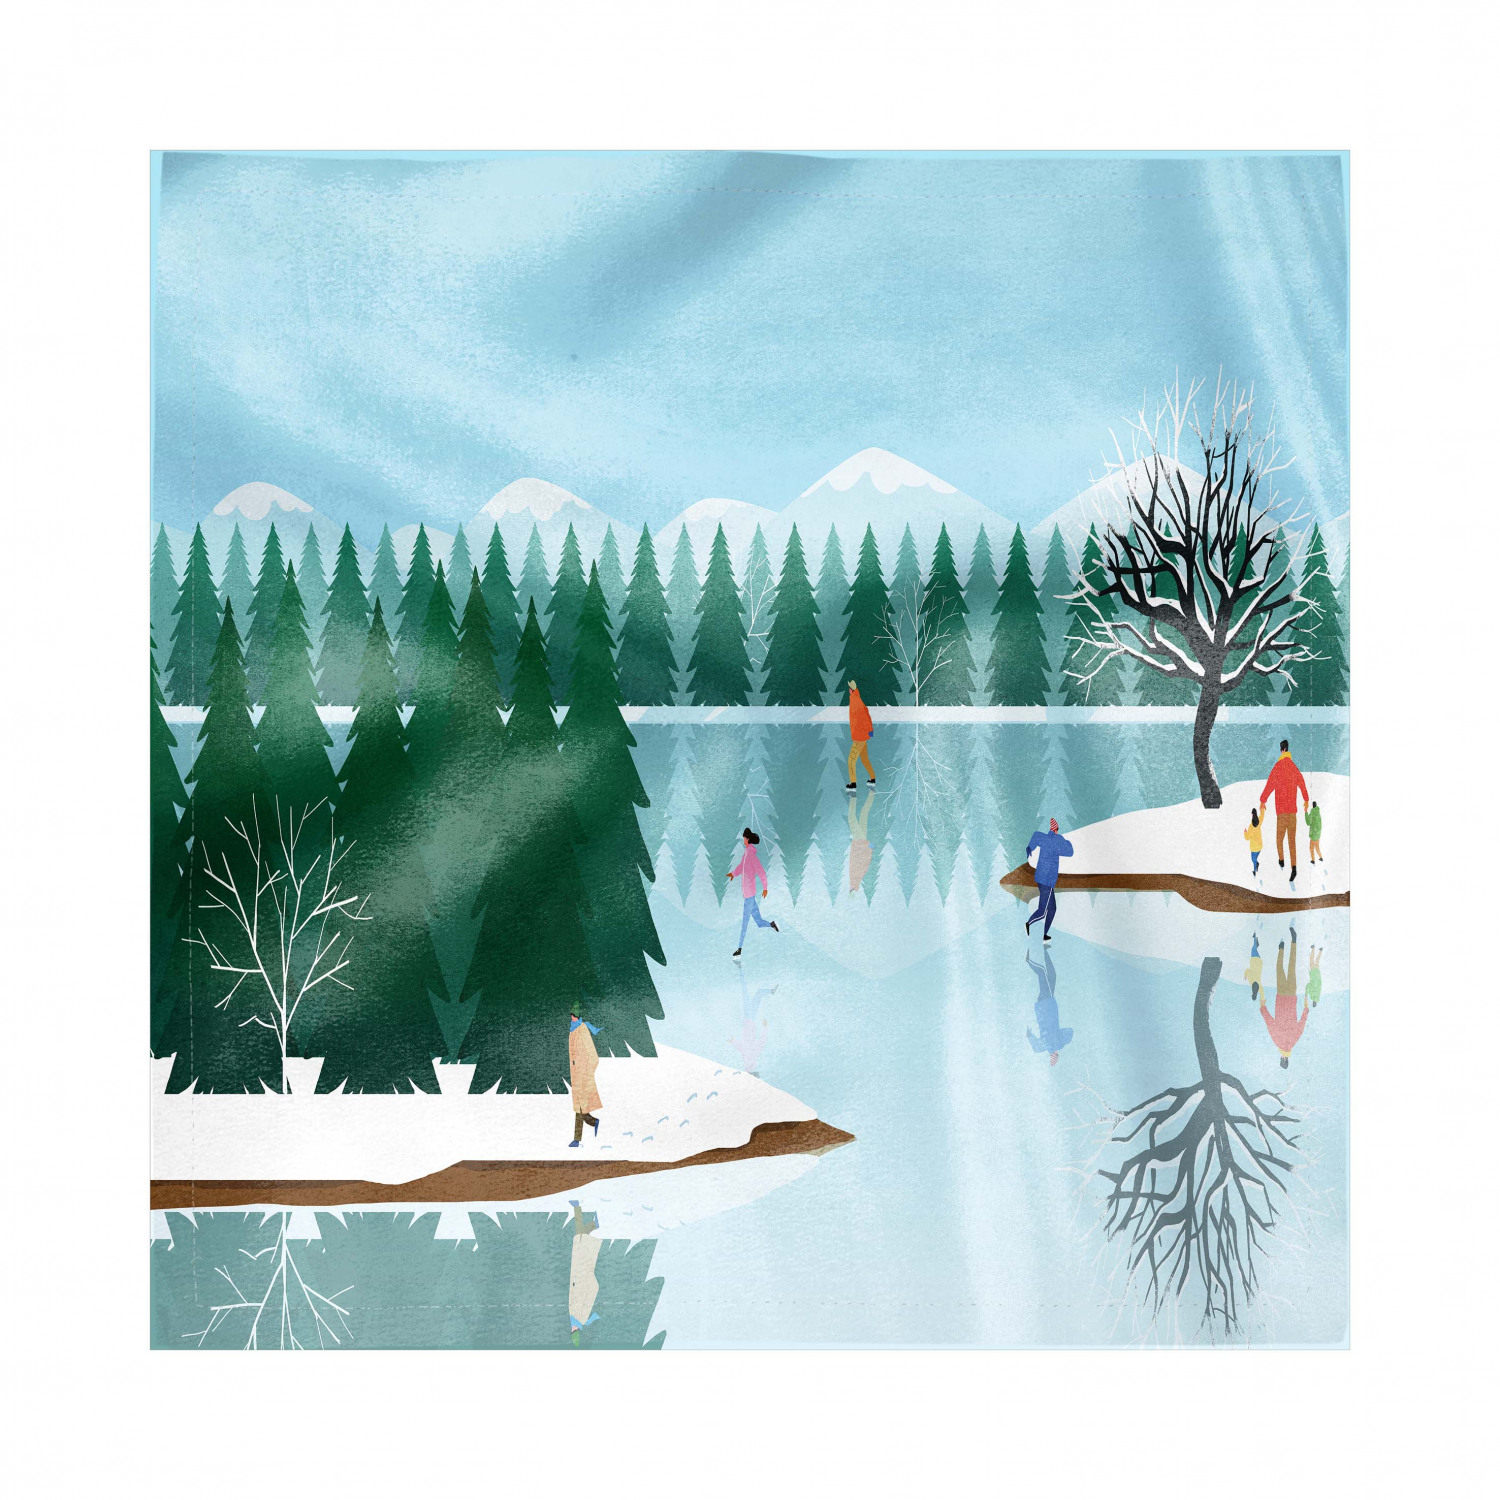 20 Festive Christmas Skating Ice Skaters Scene Lodge People Winter Snow 3 Ply Napkins Serviettes Party Dining Table Celebration